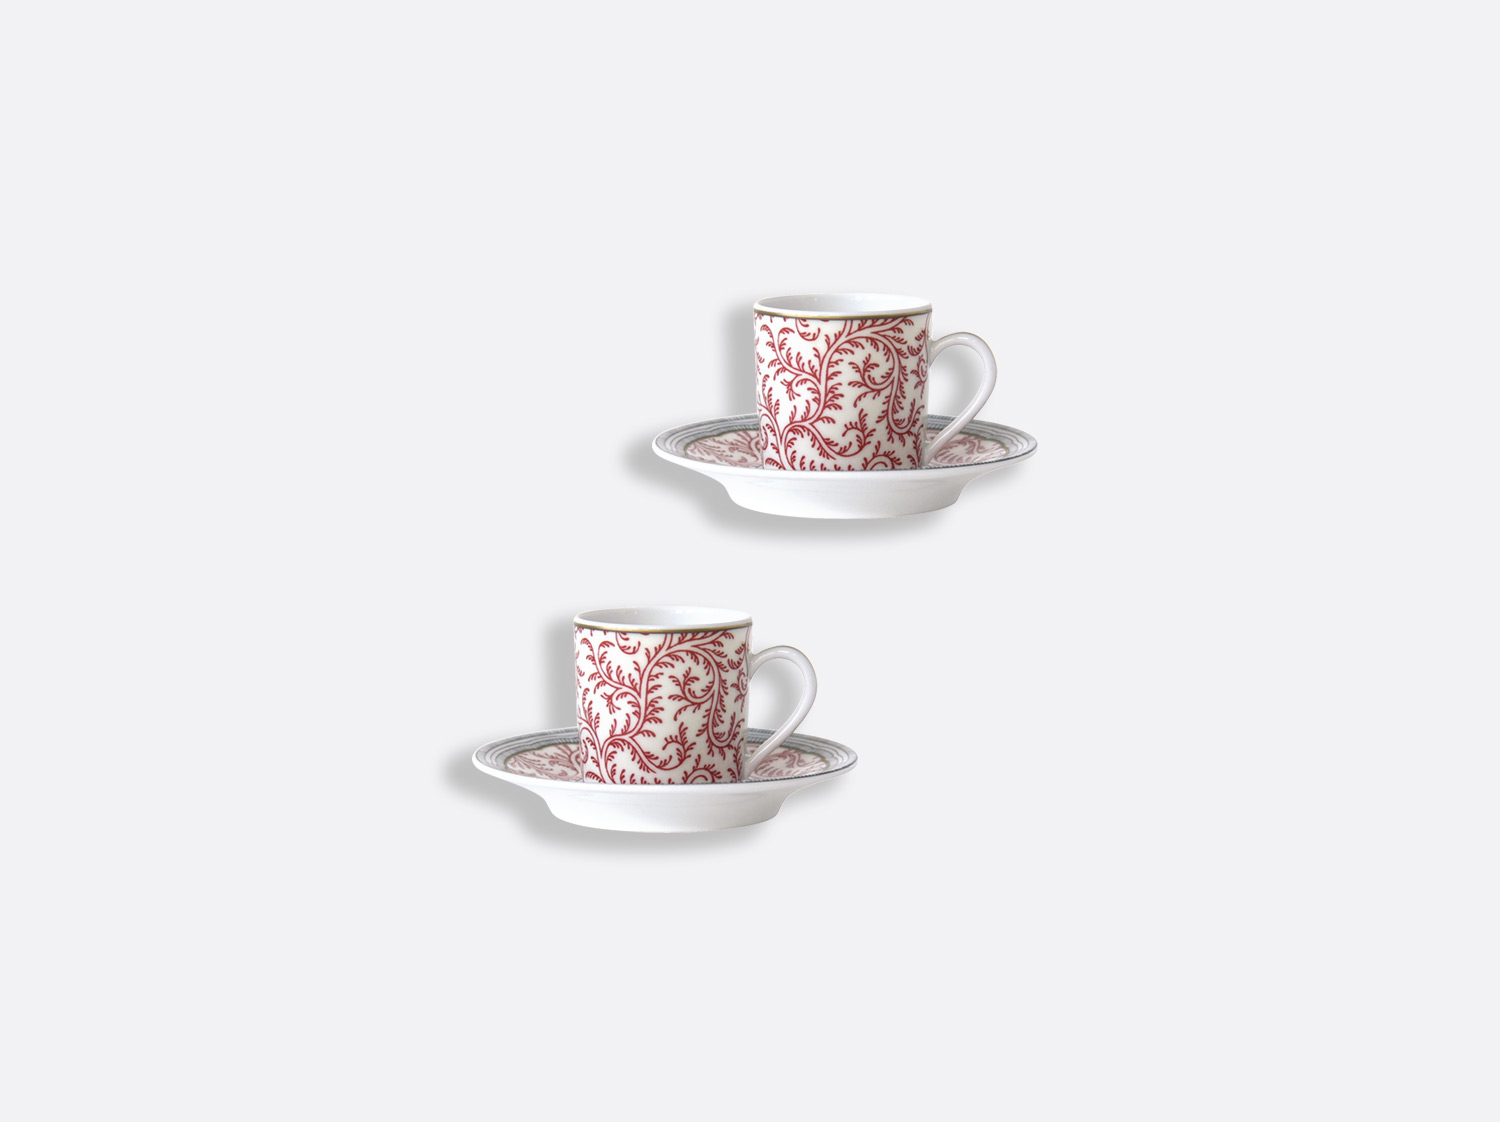 China set of 2 of the collection Collection Braquenié | Bernardaud